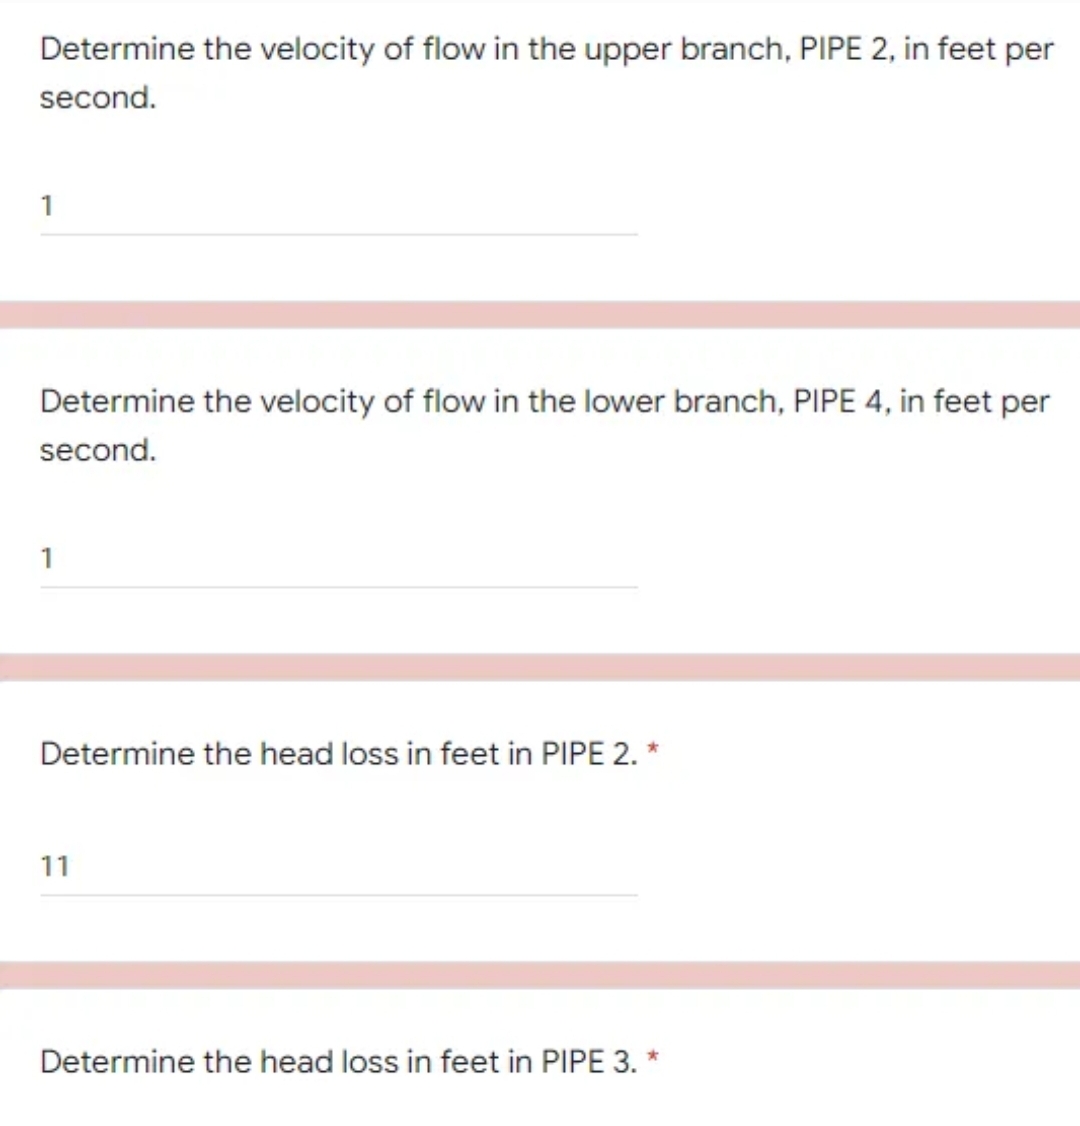 Determine the velocity of flow in the upper branch, PIPE 2, in feet per
second.
1
Determine the velocity of flow in the lower branch, PIPE 4, in feet per
second.
Determine the head loss in feet in PIPE 2. *
11
*
Determine the head loss in feet in PIPE 3.